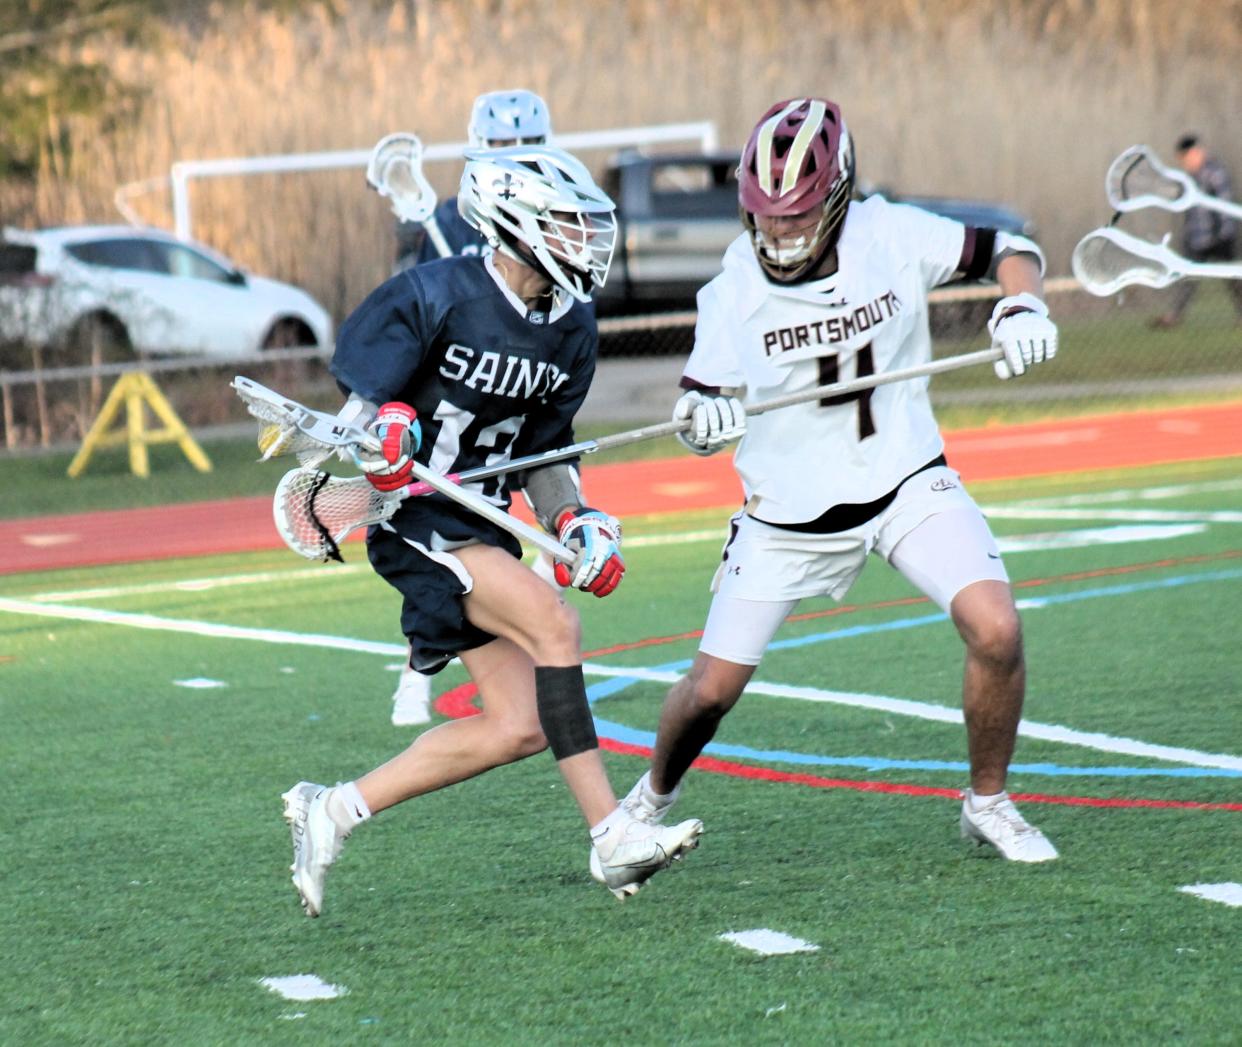 STA's Finley DeTolla, left, finds some resistance in Portsmouth defender Masi Shone during Monday night's Division II boys lacrosse game in Portsmouth. The Clippers held off the rival Saints, 10-9 and remained undefeated on the season.